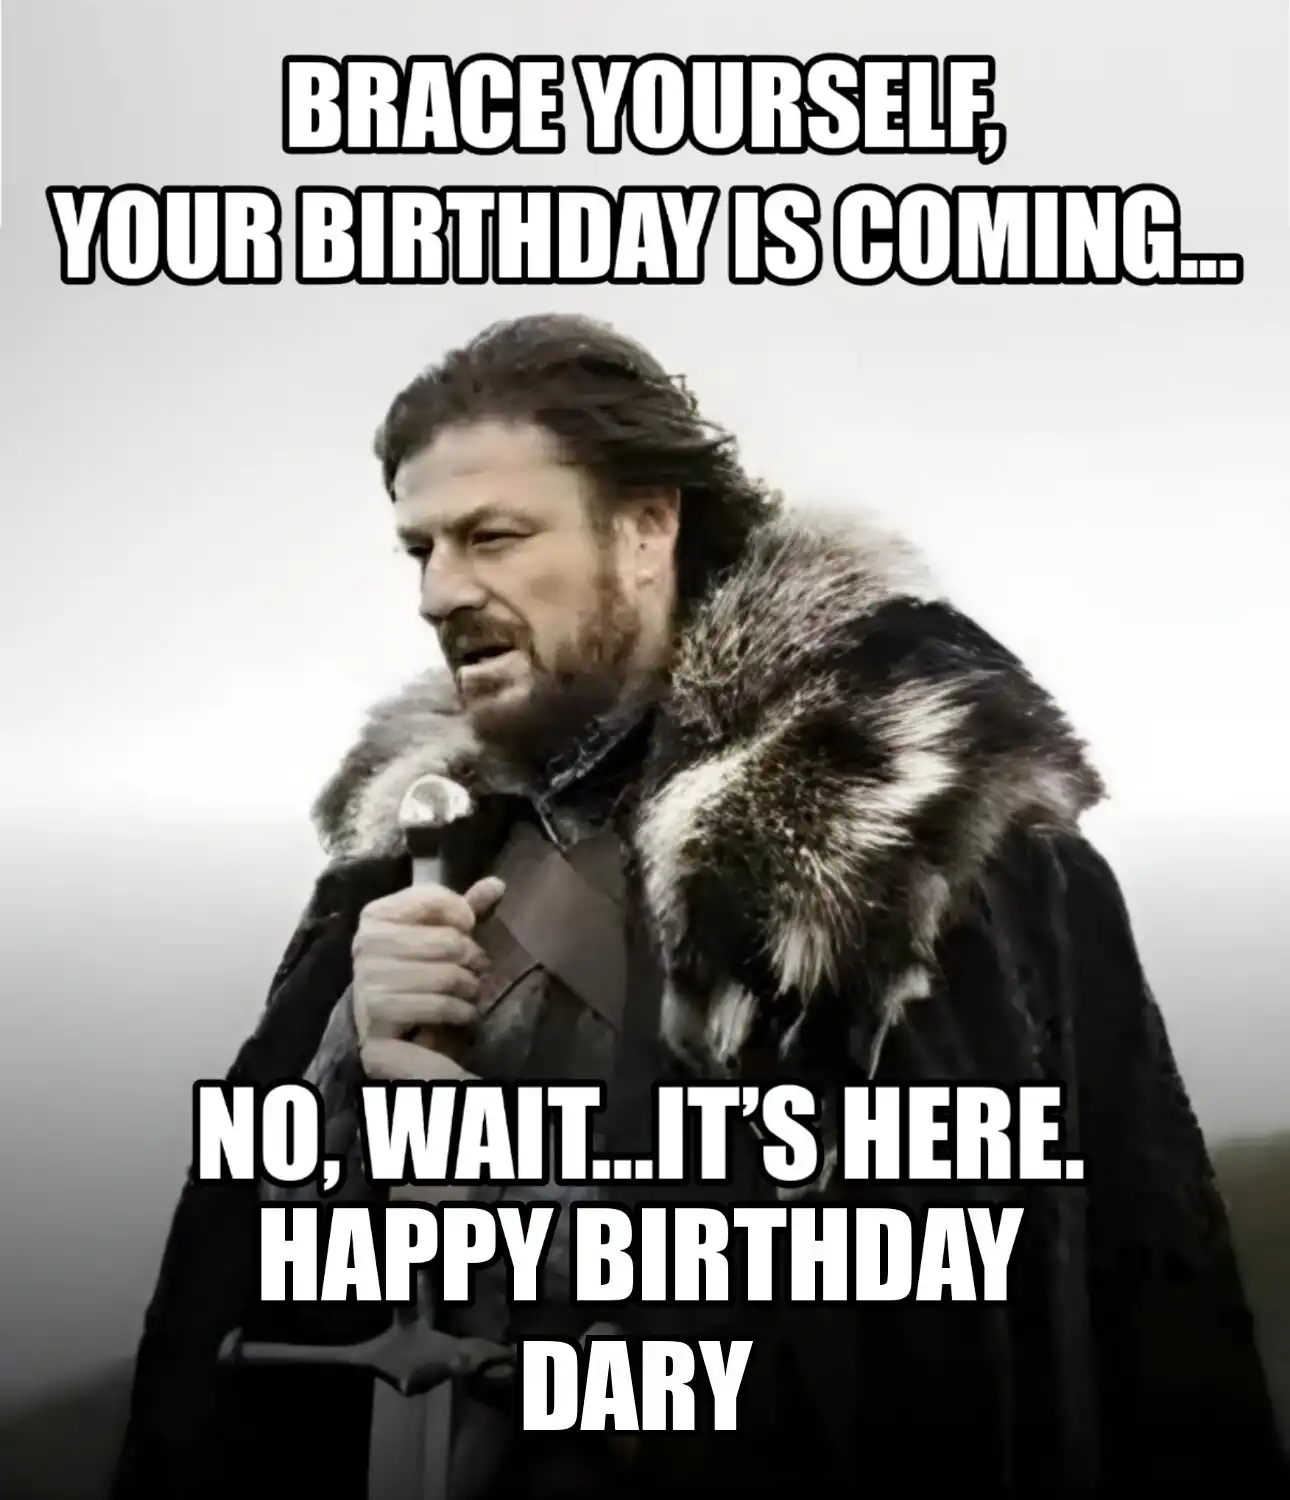 Happy Birthday Dary Brace Yourself Your Birthday Is Coming Meme